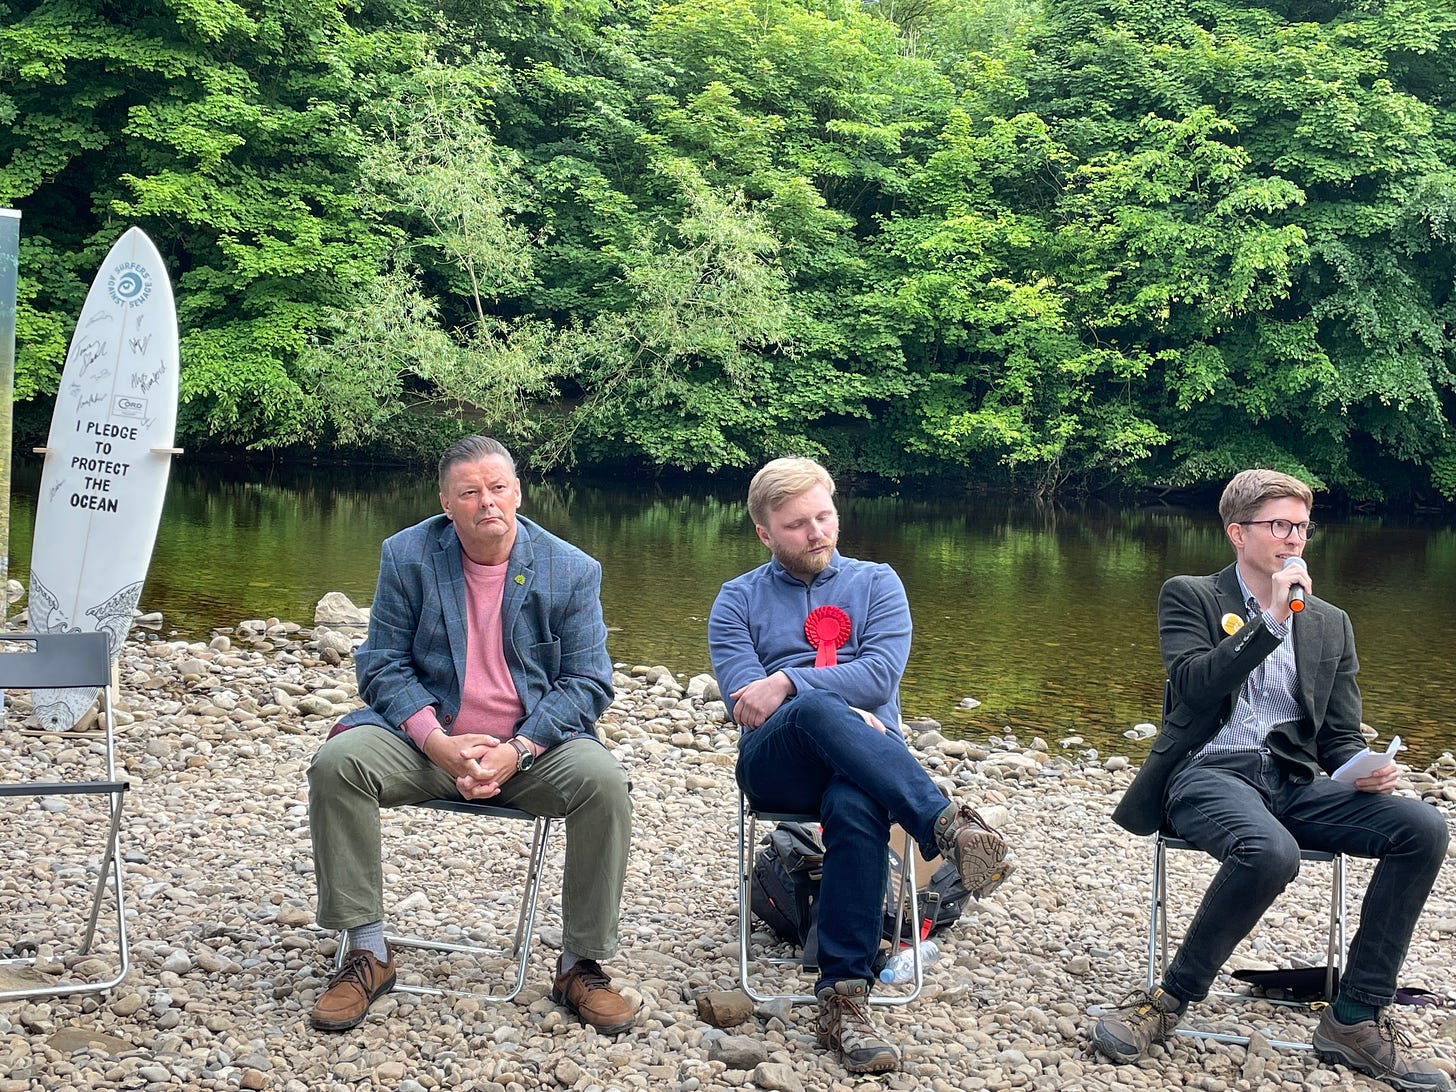 Election candidates sit on temporary chairs by the river swale Kevin Foster (Green), Tom Wilson (Labour) and Daniel Callaghan (Lib Dem)